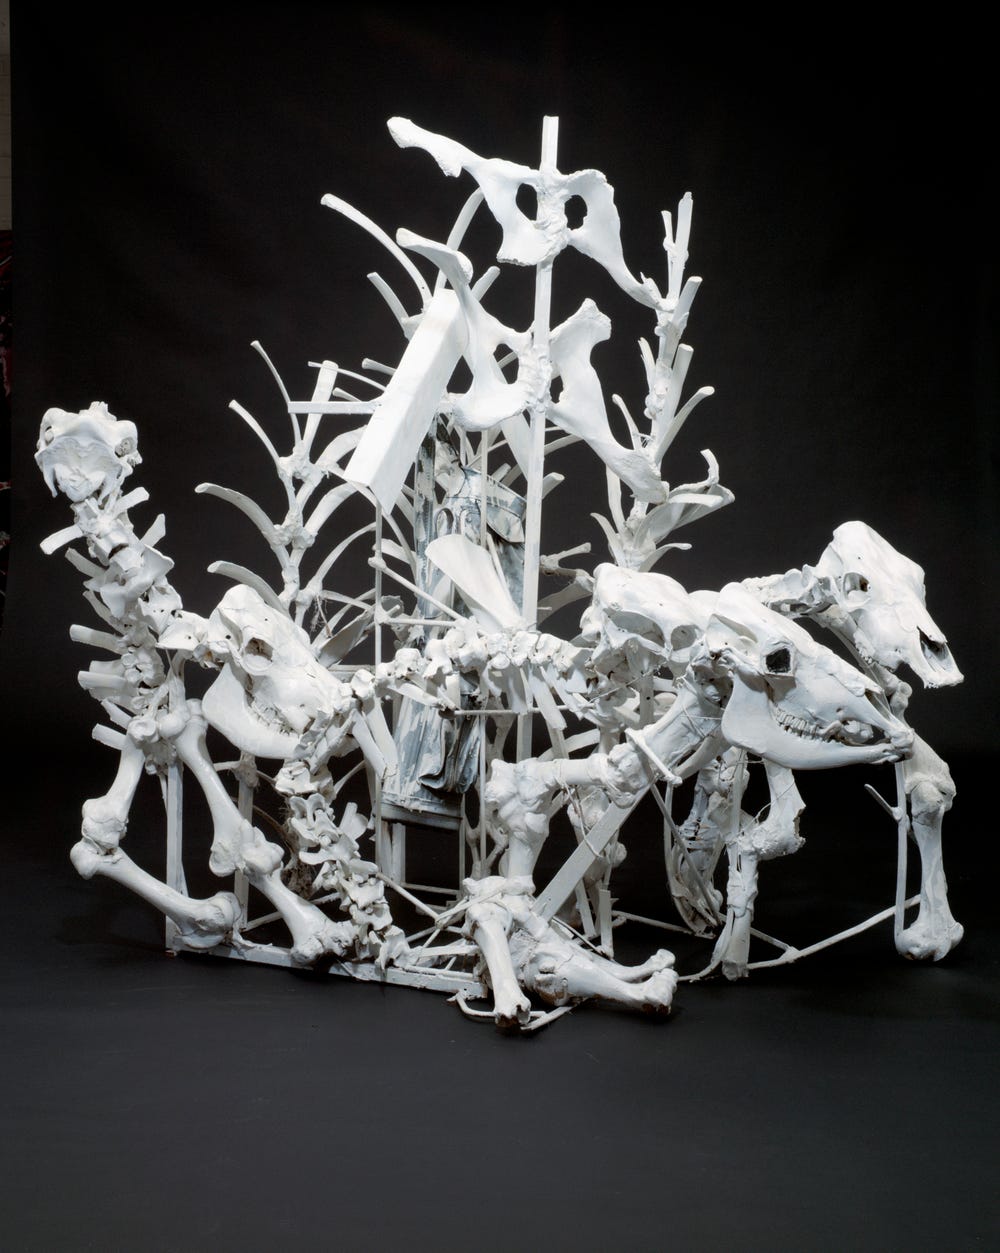 sculpture made from cow skeletons